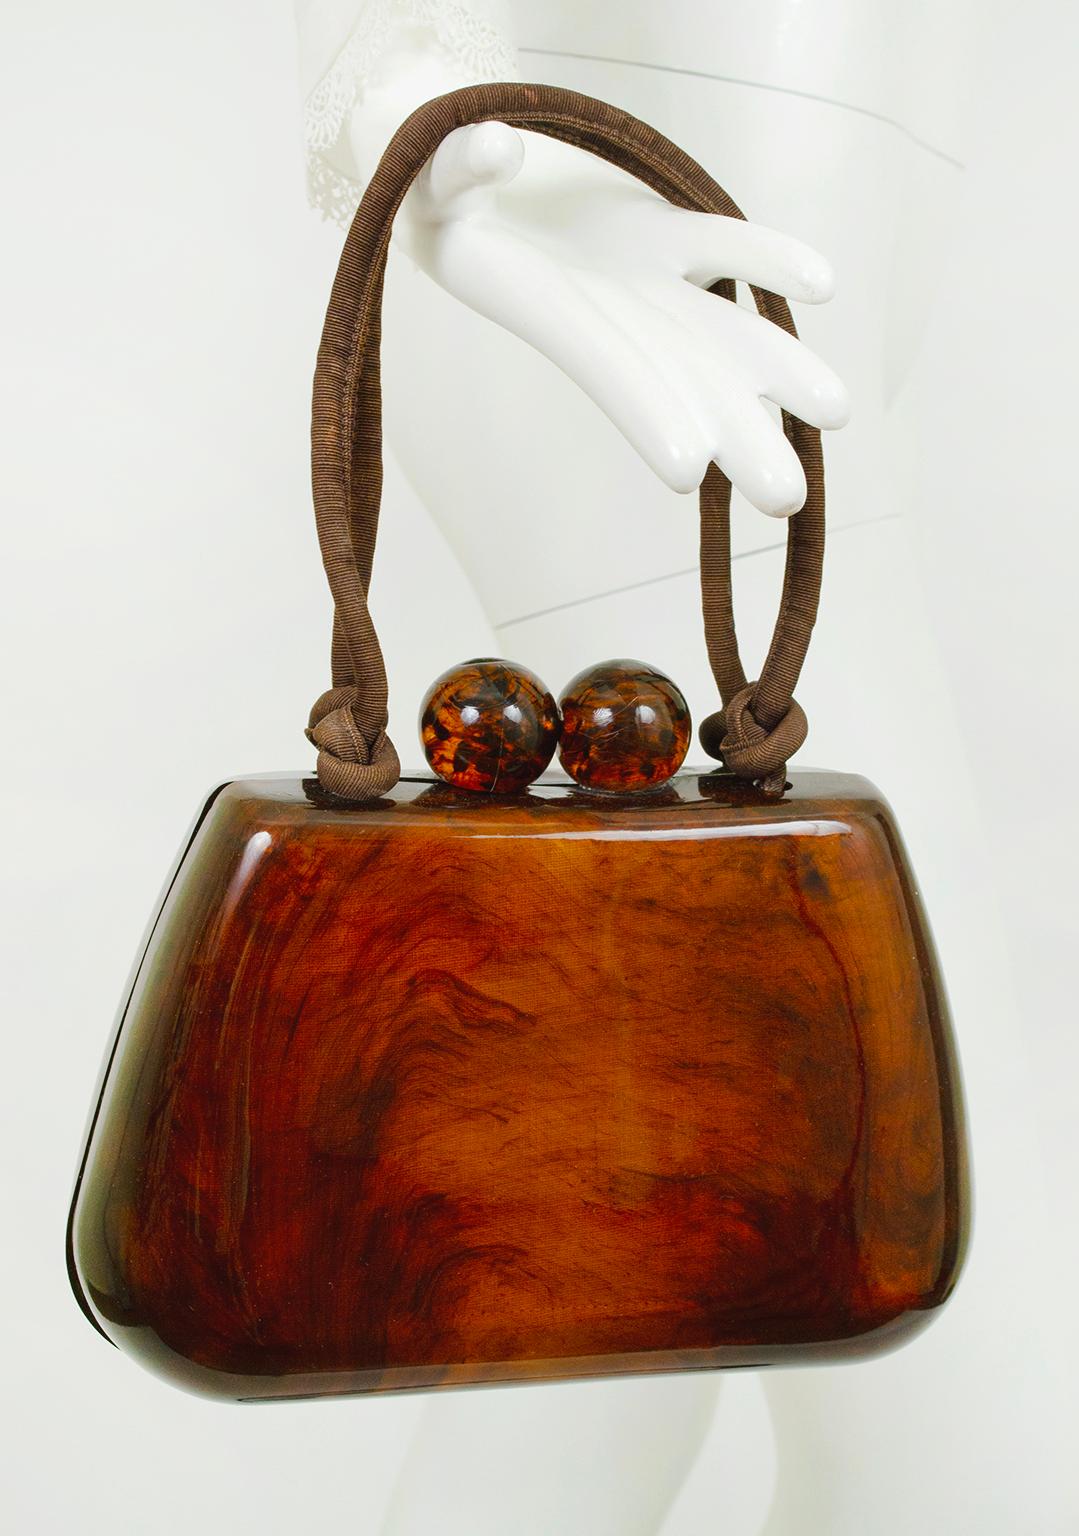 Bolta, the maker of the instantly recognizable Boltabest TV dinner trays of the 1950s, was one of the premier manufacturers of Lucite housewares during the mid-century. This clamshell handbag reveals the makers’ proficiency with the material, as the